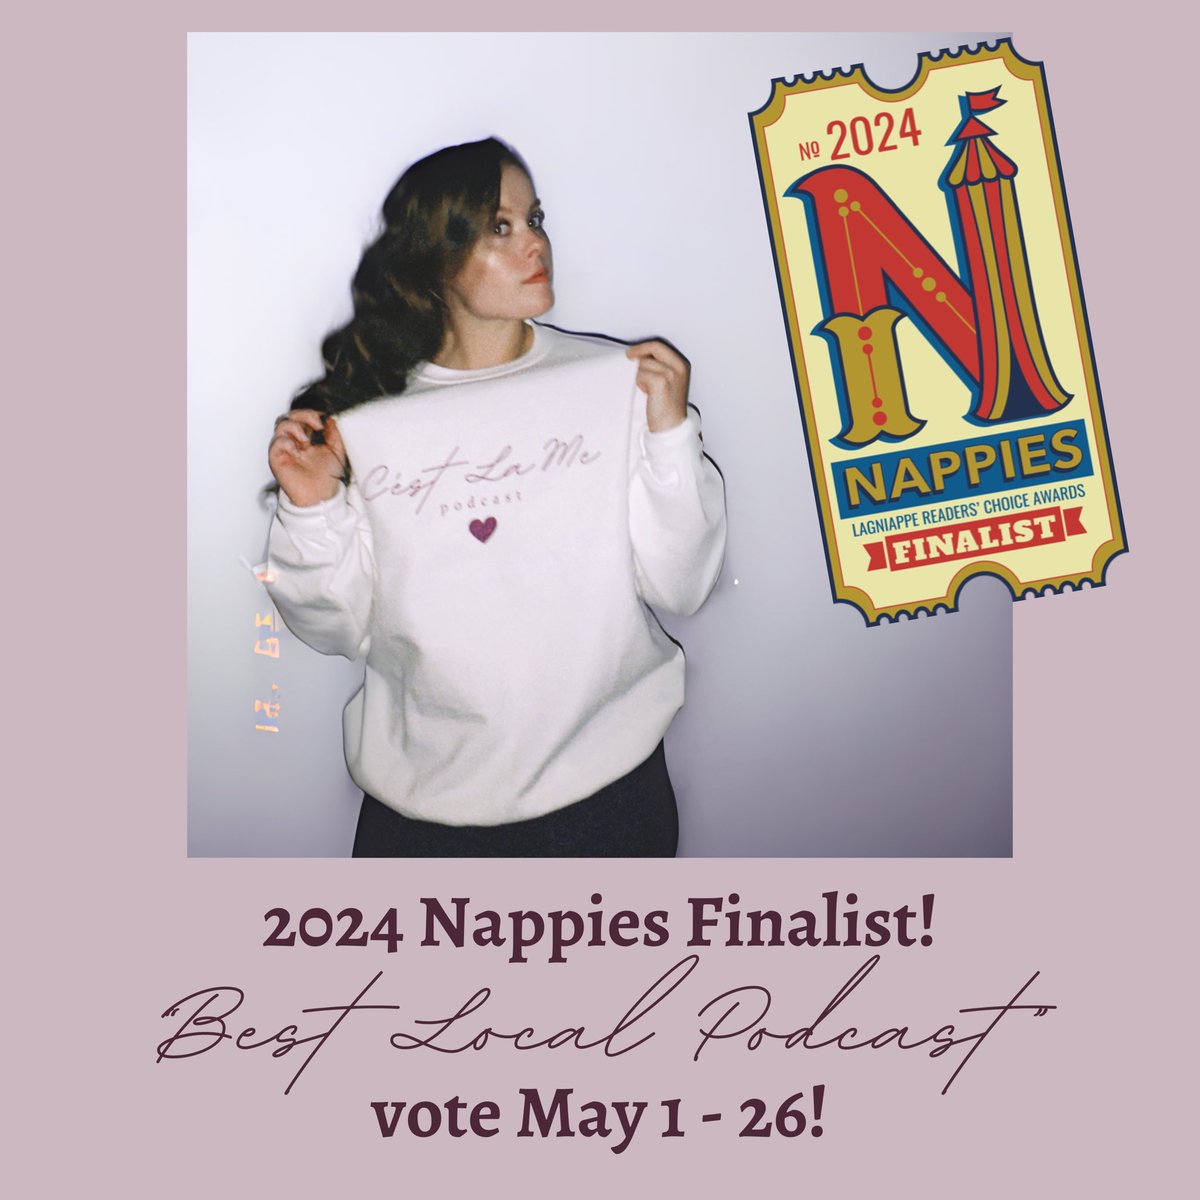 Y’ALL! C’est La Me made it to the finals for “Best Local Podcast” in the 2024 Nappies! 🎉 I’ll share more as voting gets nearer but I wanted to thank y’all SO much for voting, listening, liking, sharing & supporting! so excited, ahhh! 💜 #podcast #awardsseason #podcastlife